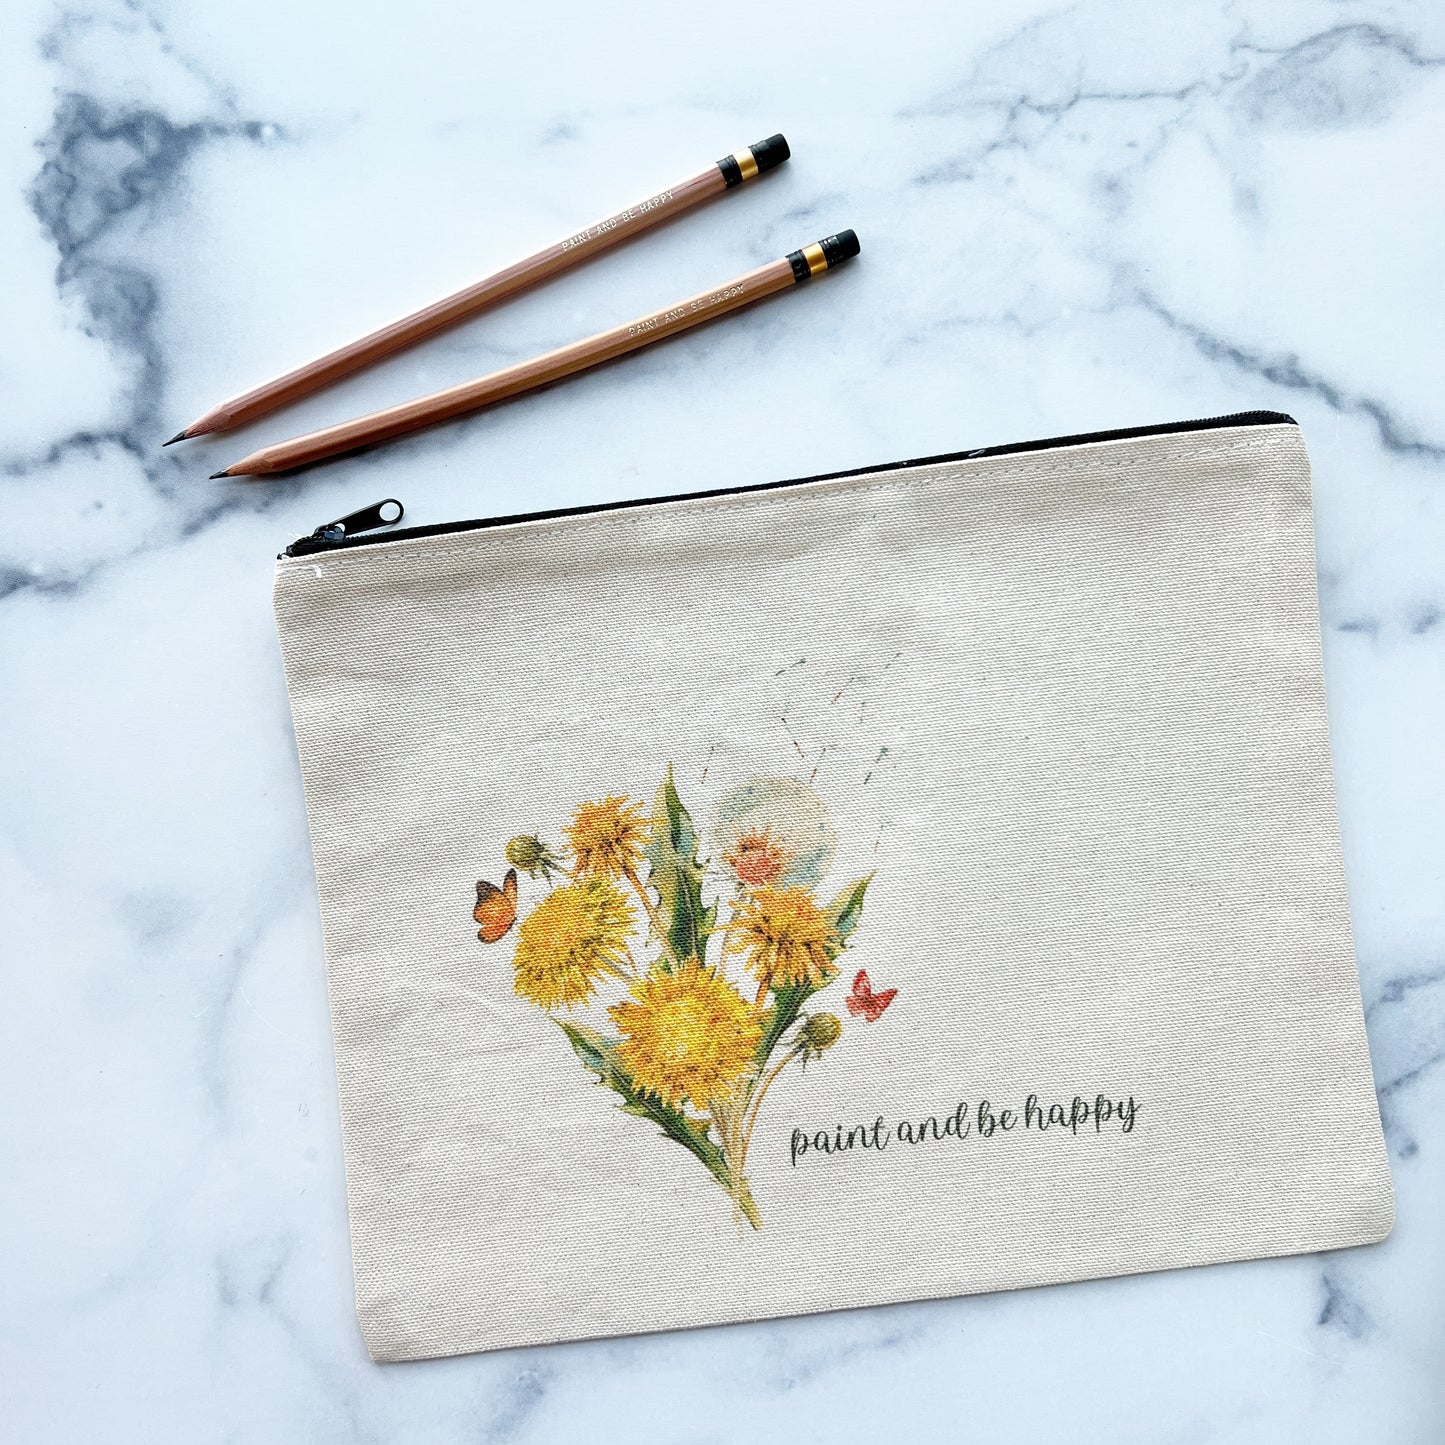 Large Paint and Be Happy Canvas Travel Pouch with Dandelions, 8.5" x 11"